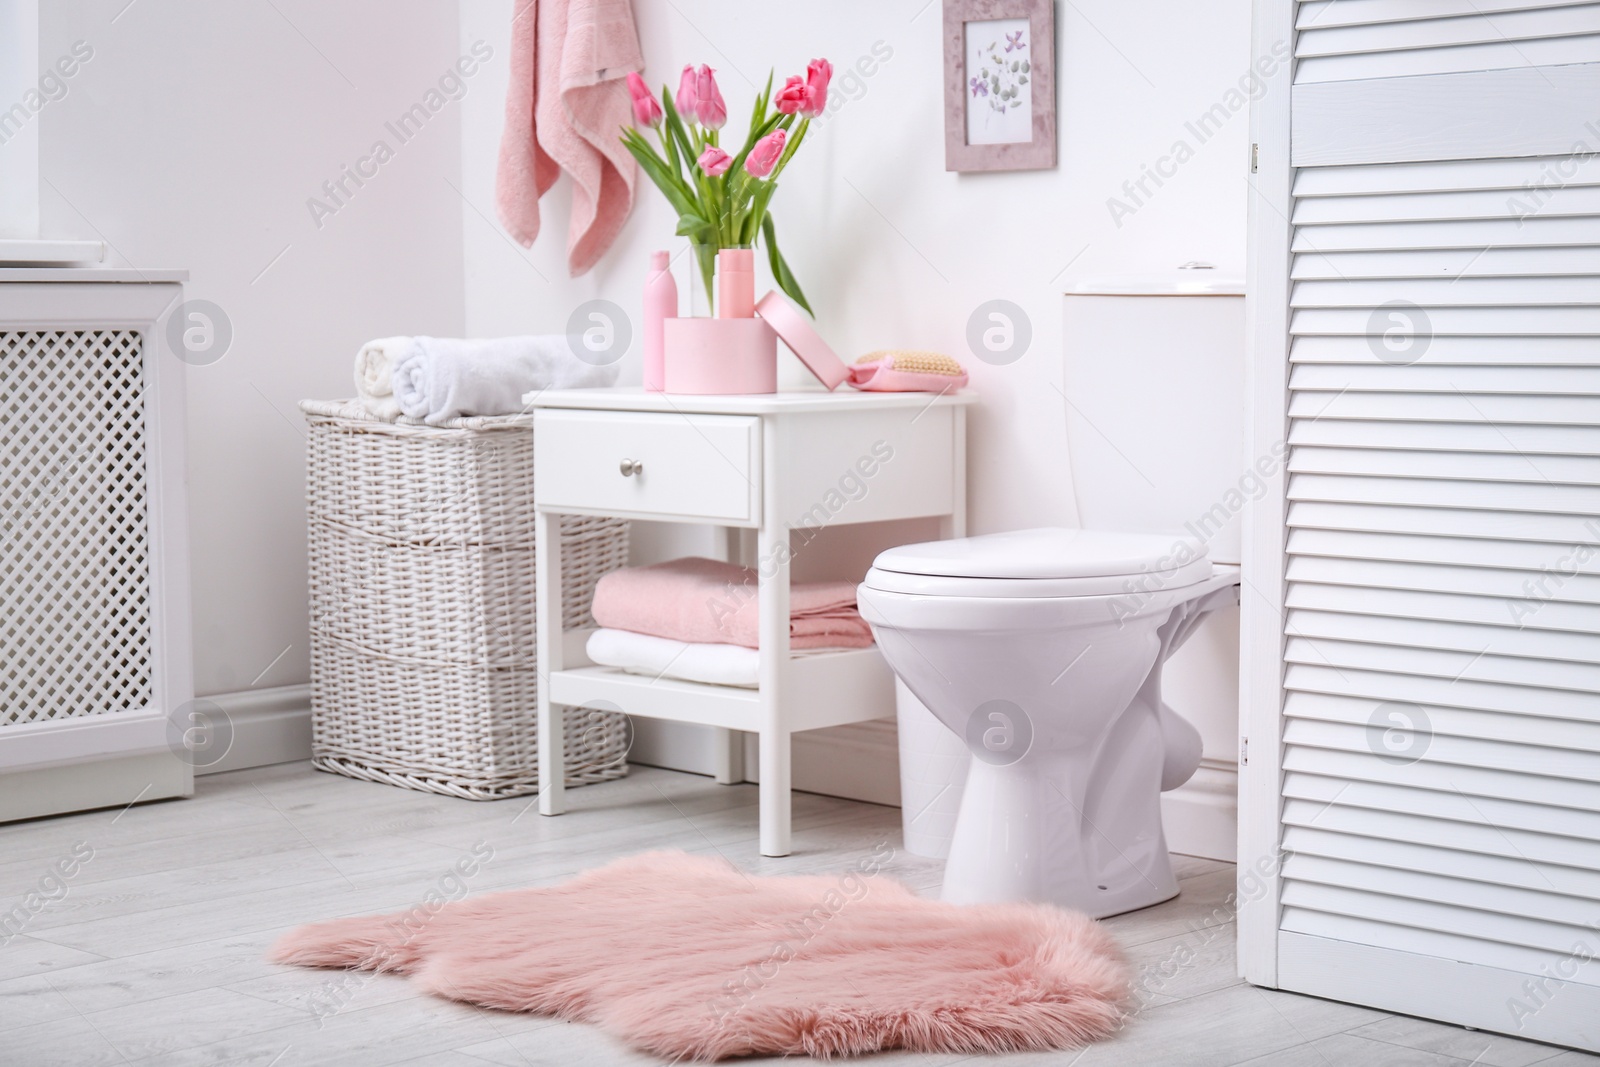 Photo of Interior of stylish bathroom with toilet bowl and decor elements